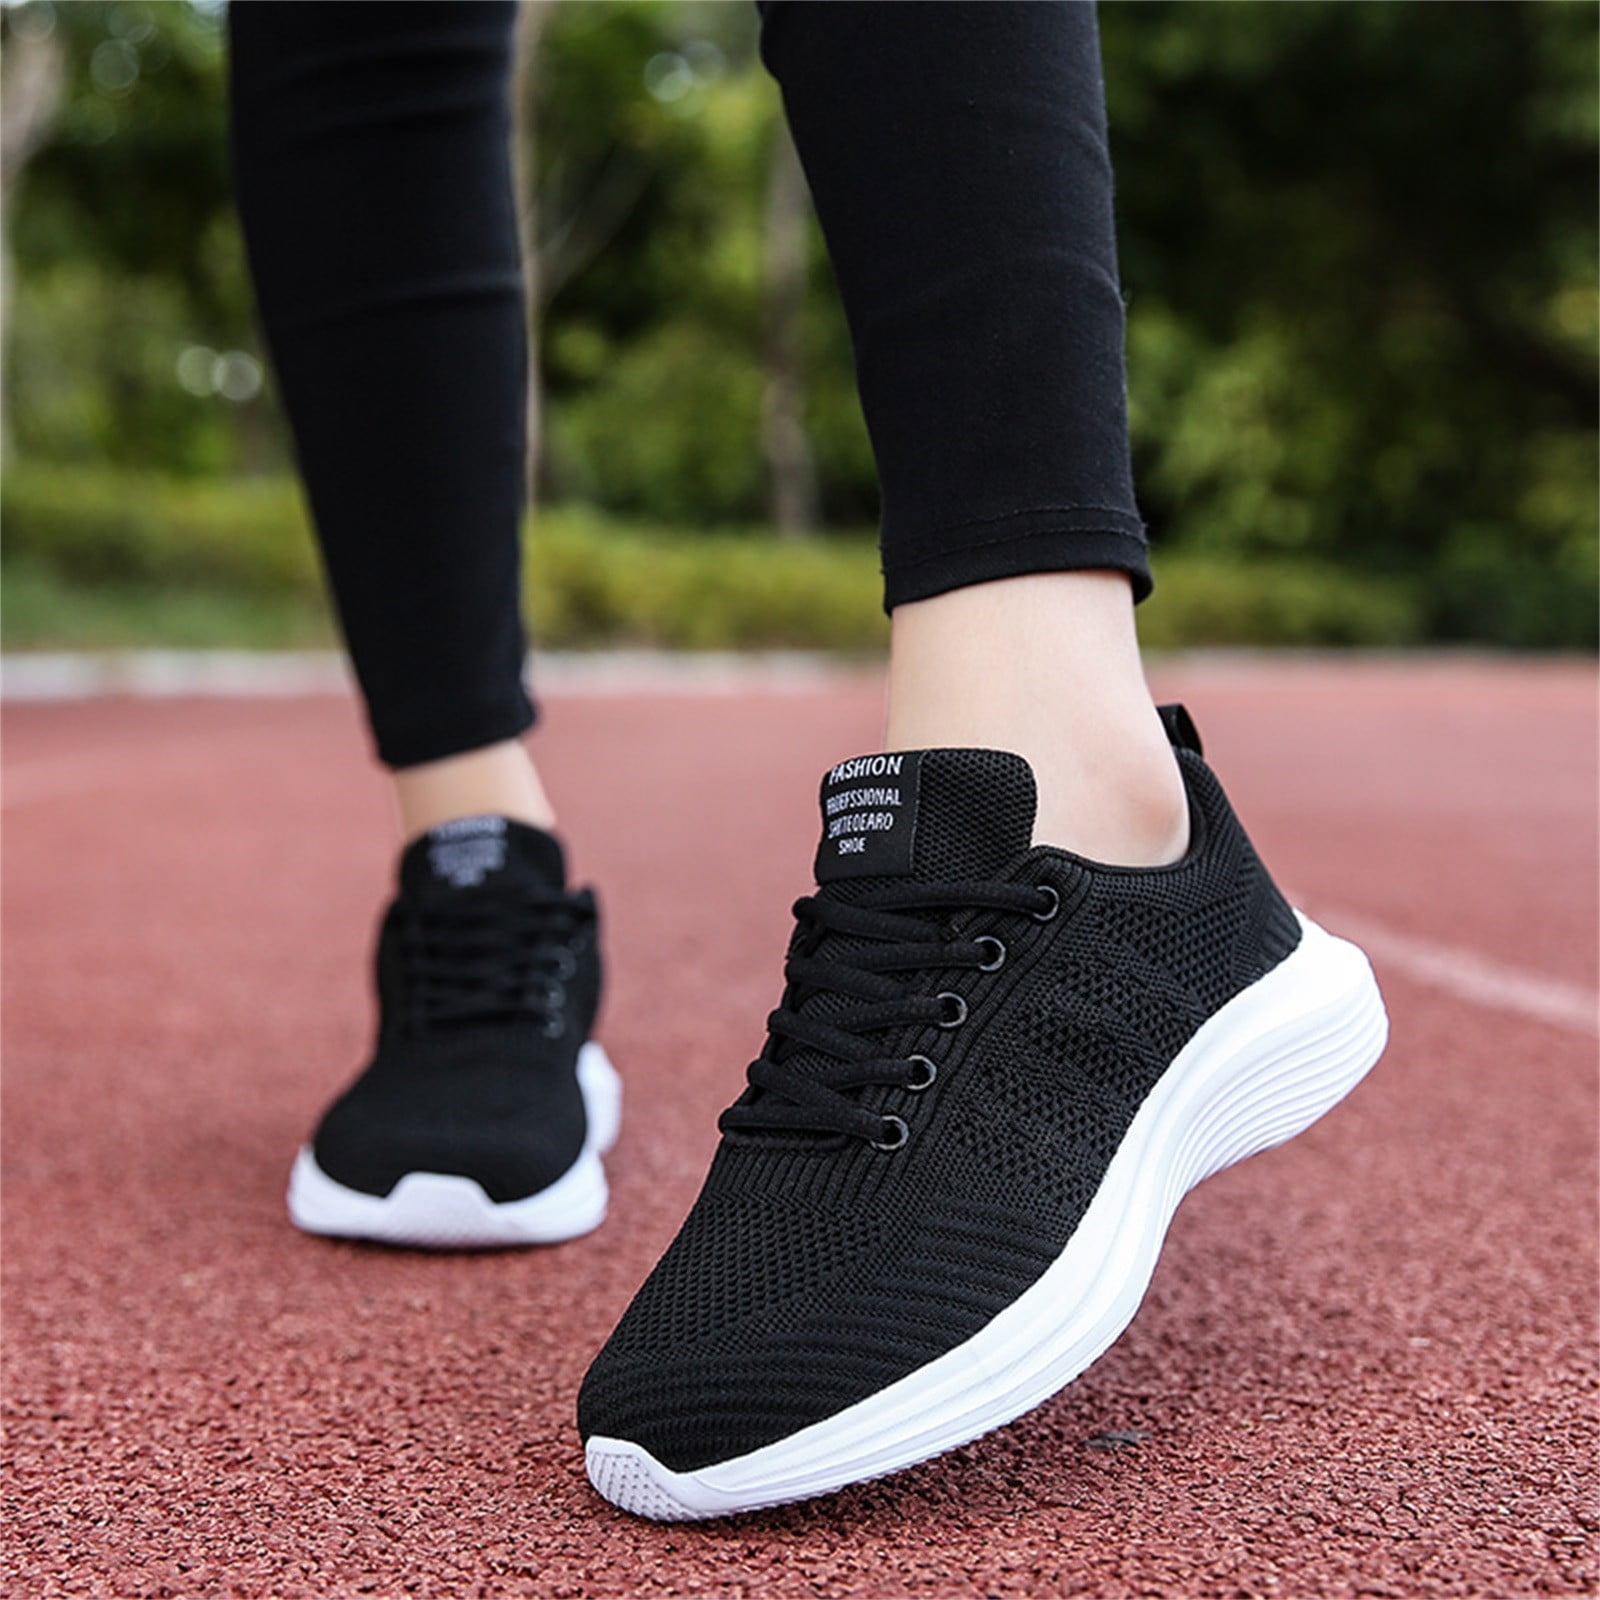 Quealent Womens Running Shoes Sneakers for Women Fashion Sneakers Tennis  Shoes Women Sneakers Tenis para Mujeres Womens Shoe Sneakers Women's